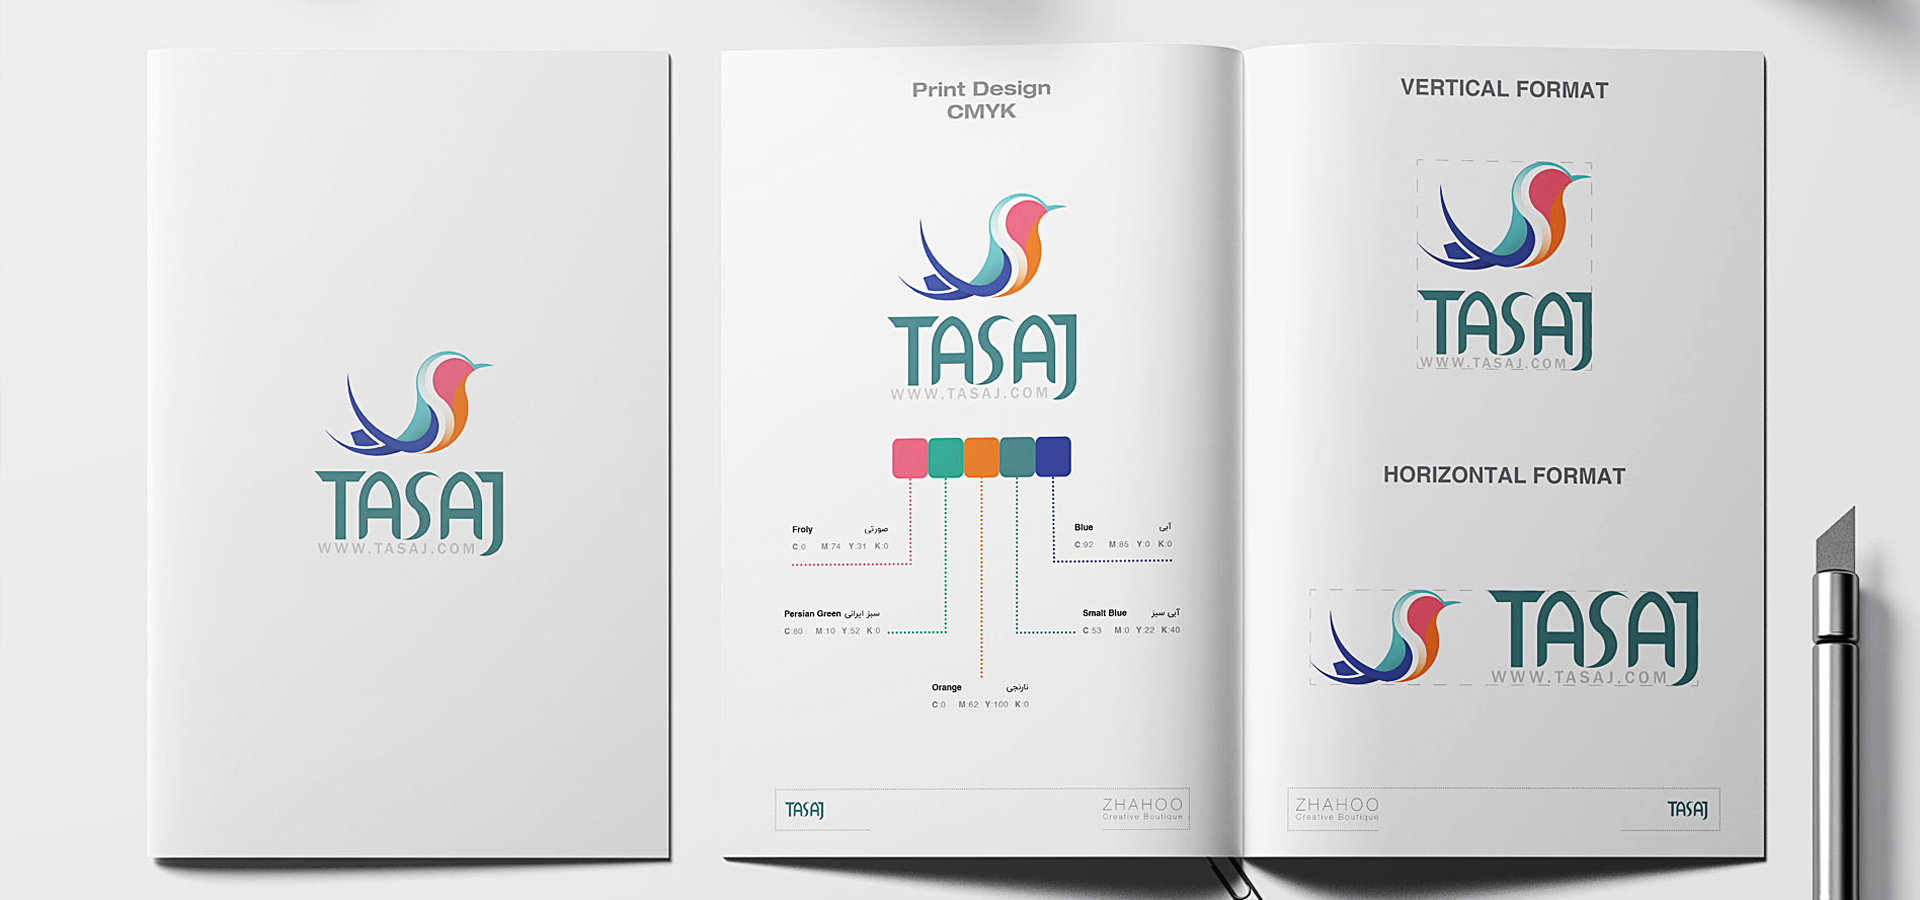 Corporate scheme colors of Tasaj, embedded on brand book design, designed by Zhahoo Creative Agency.